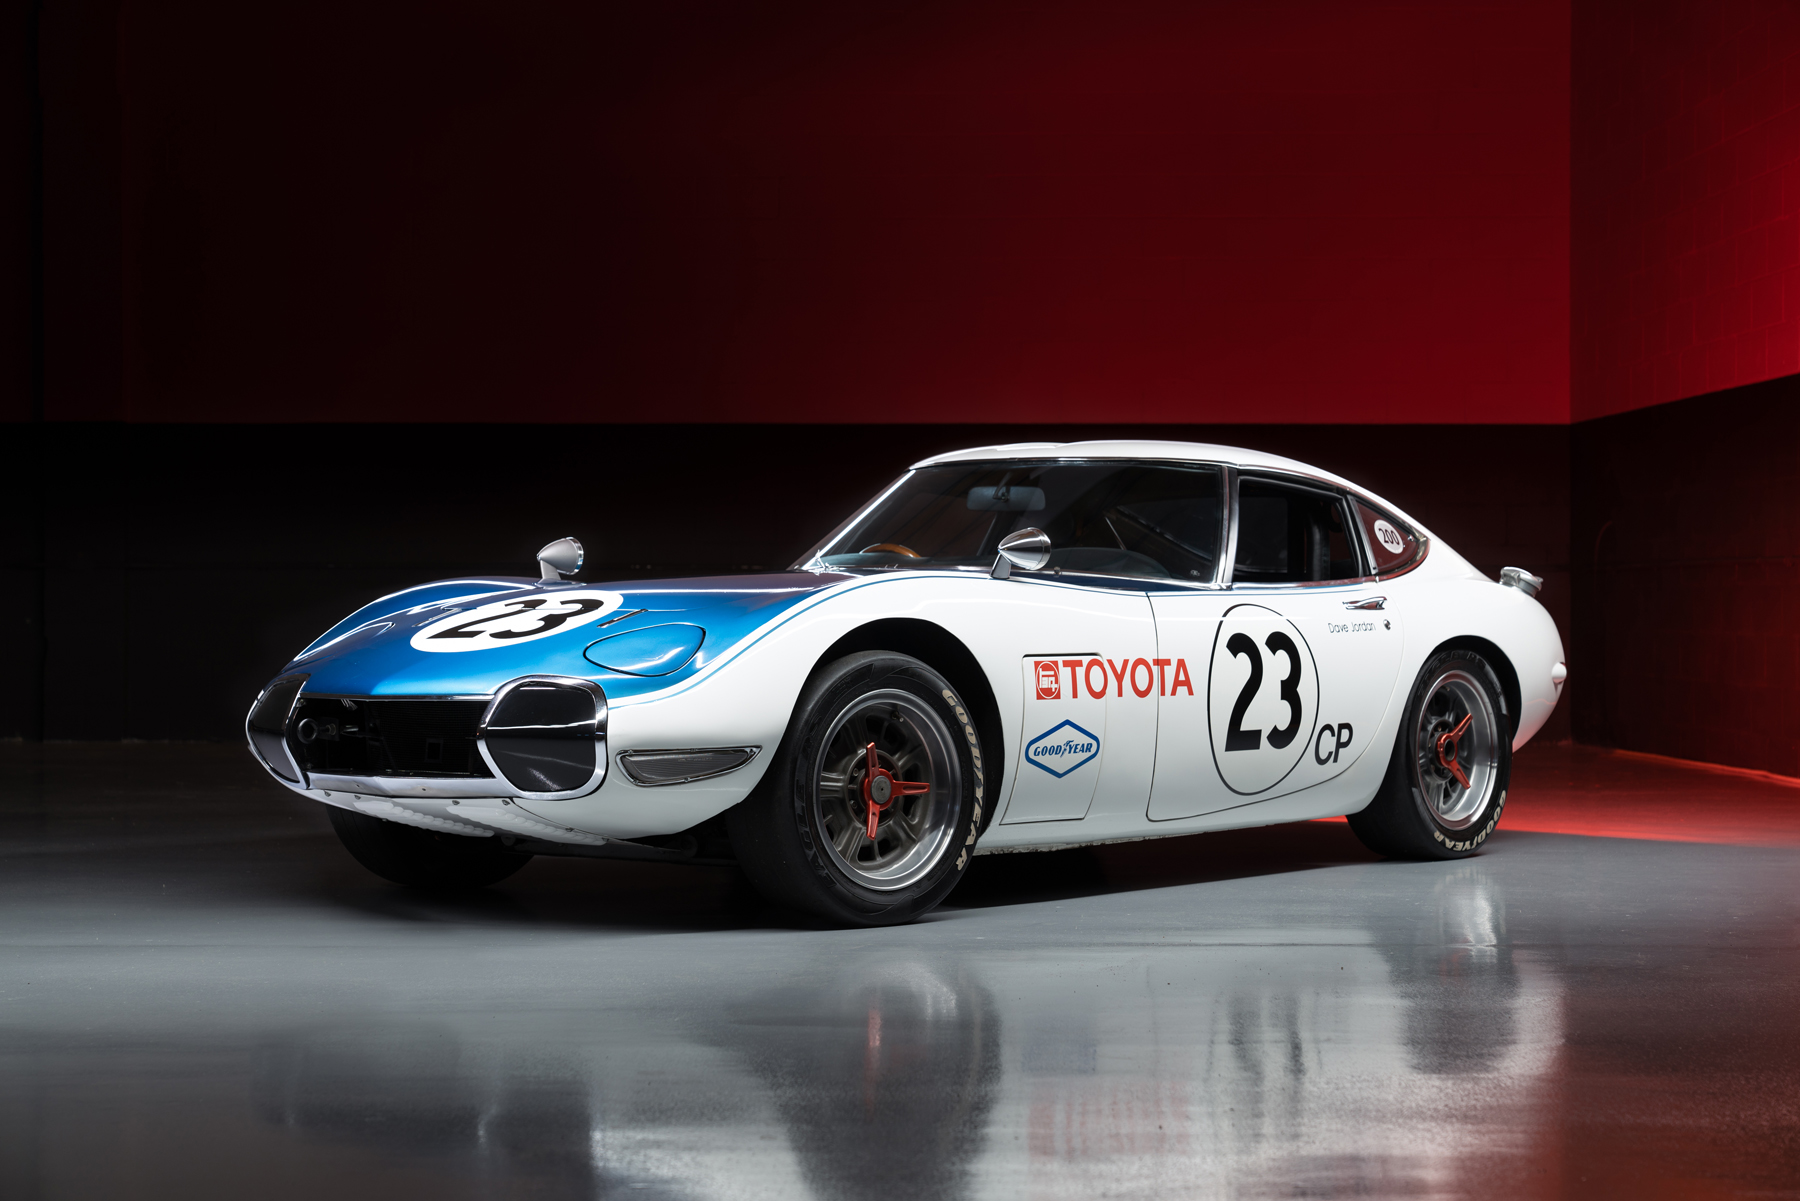 Will this super-rare Shelby Toyota 2000GT racer set auction records?